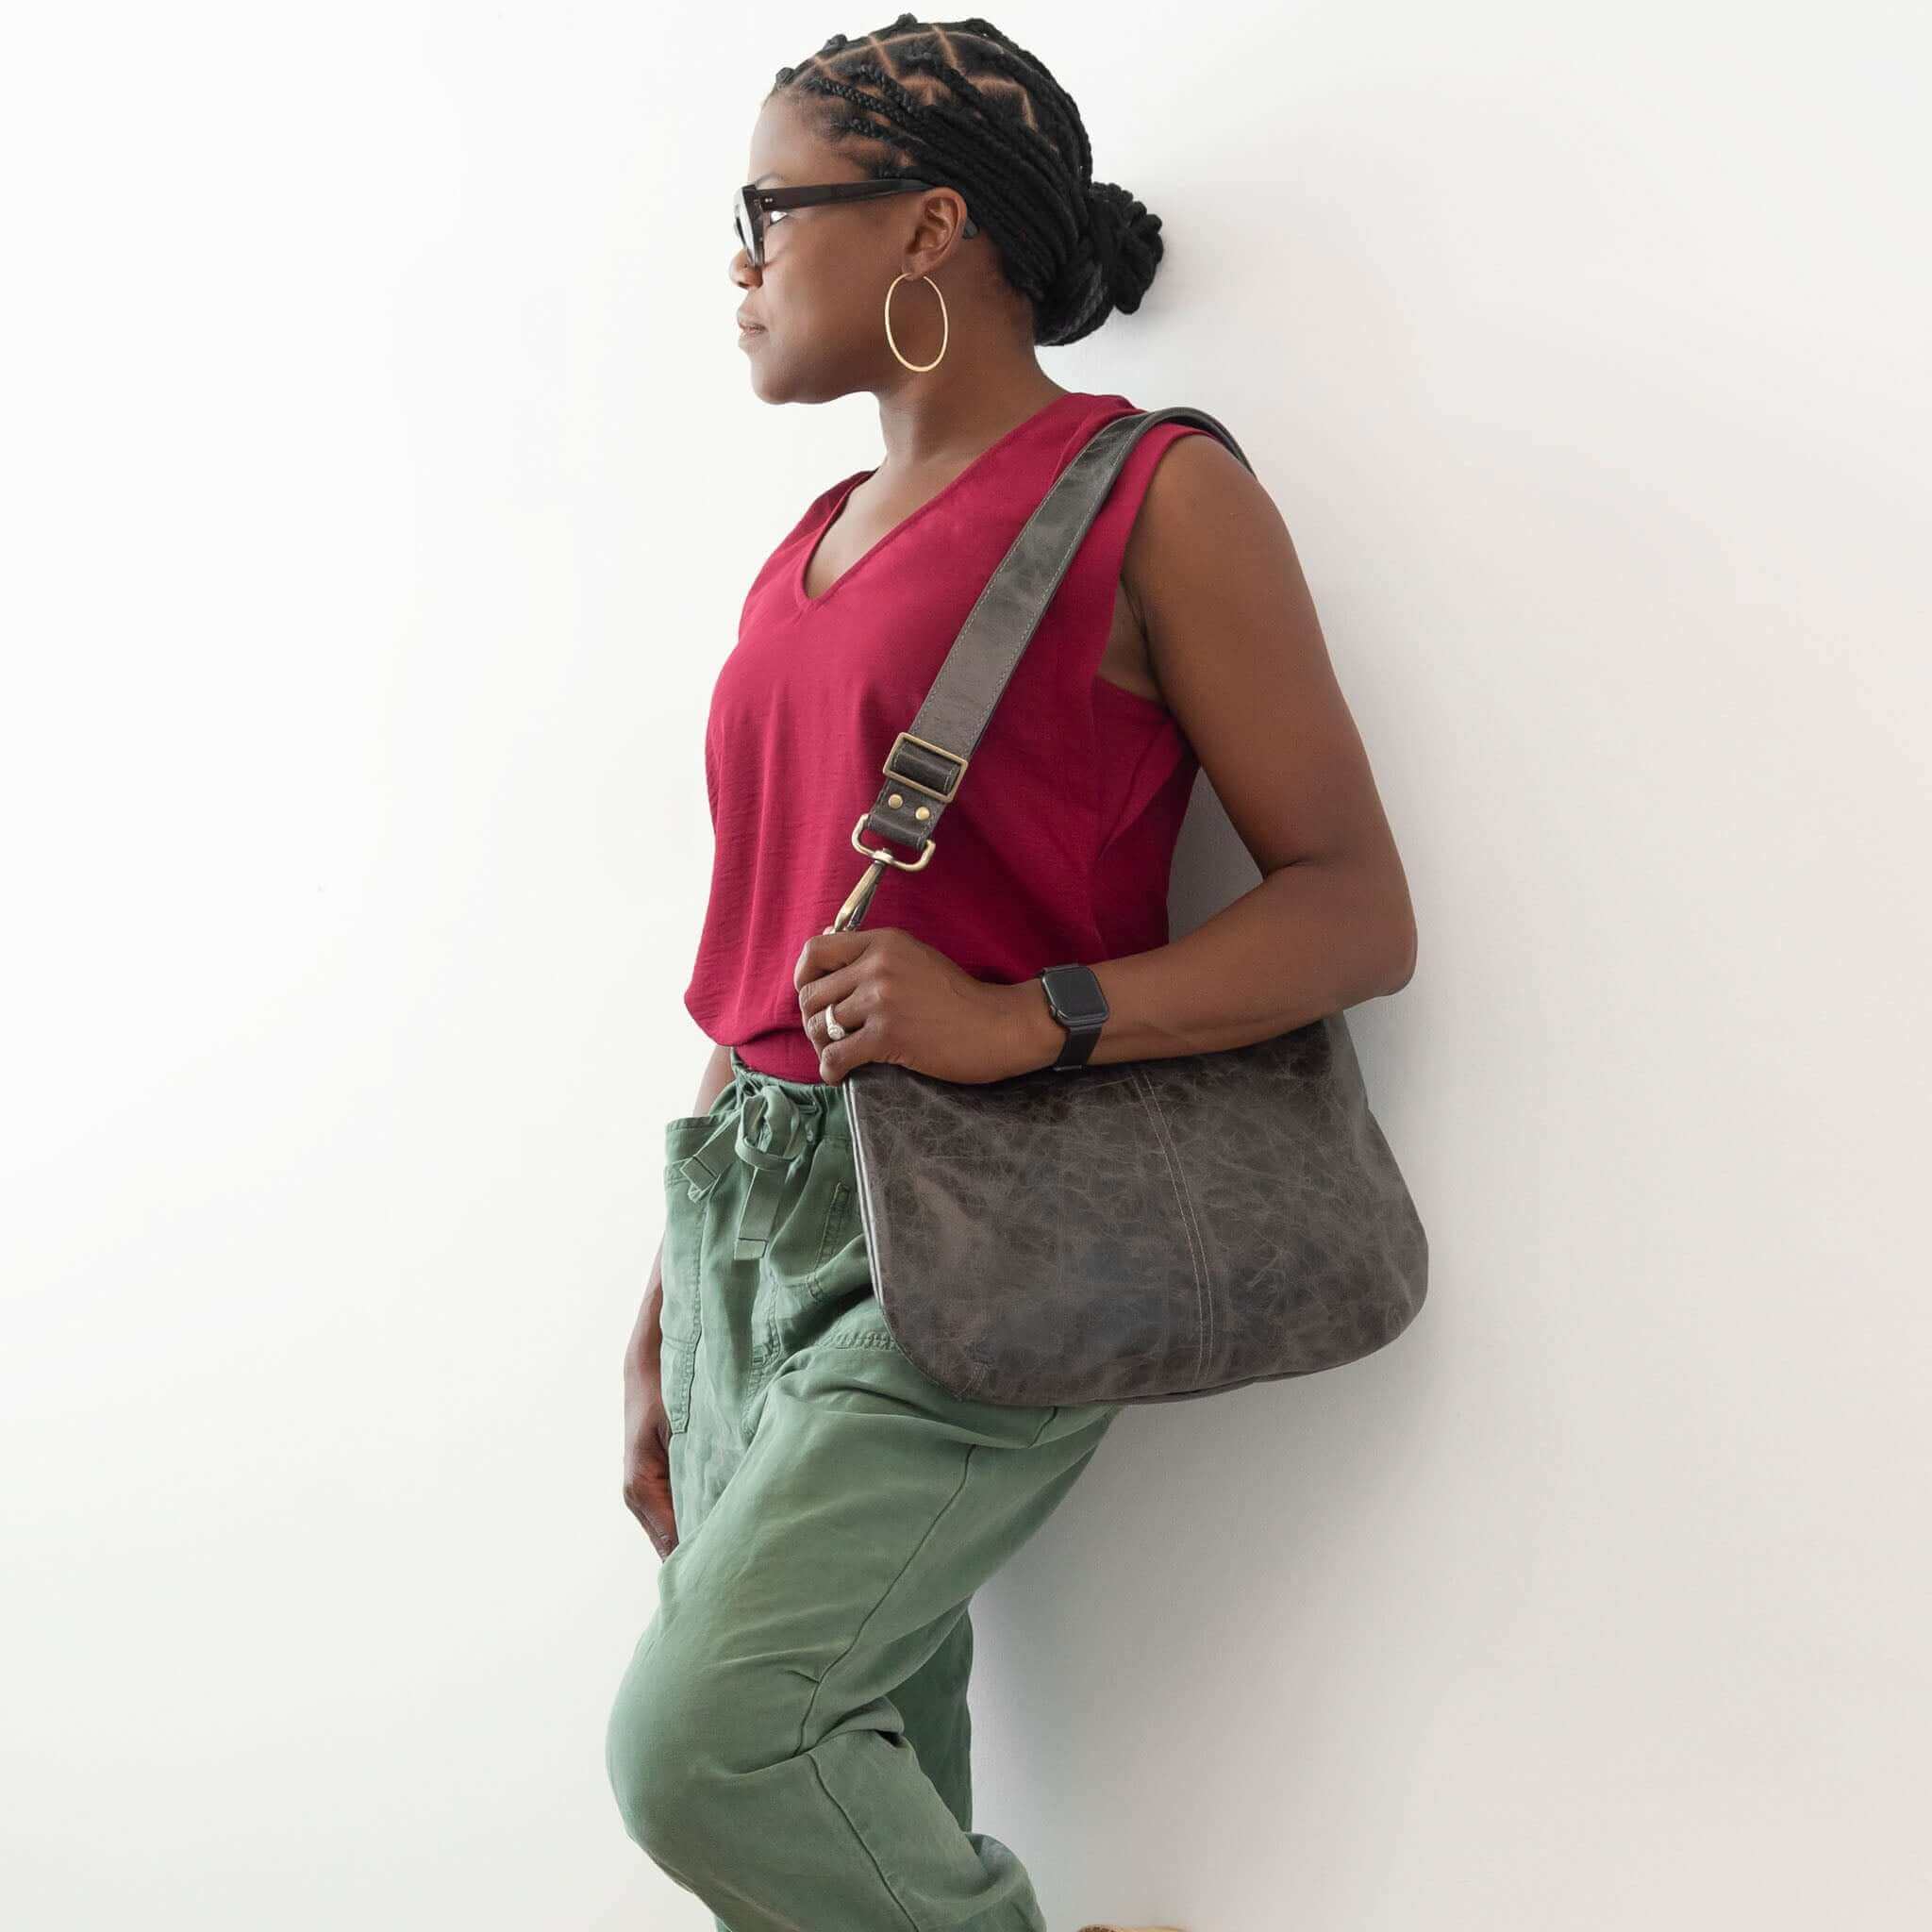 Hobo Crossbody Bag, Leather Purse | Mayko Bags Chocolate / Yes Lining for Me